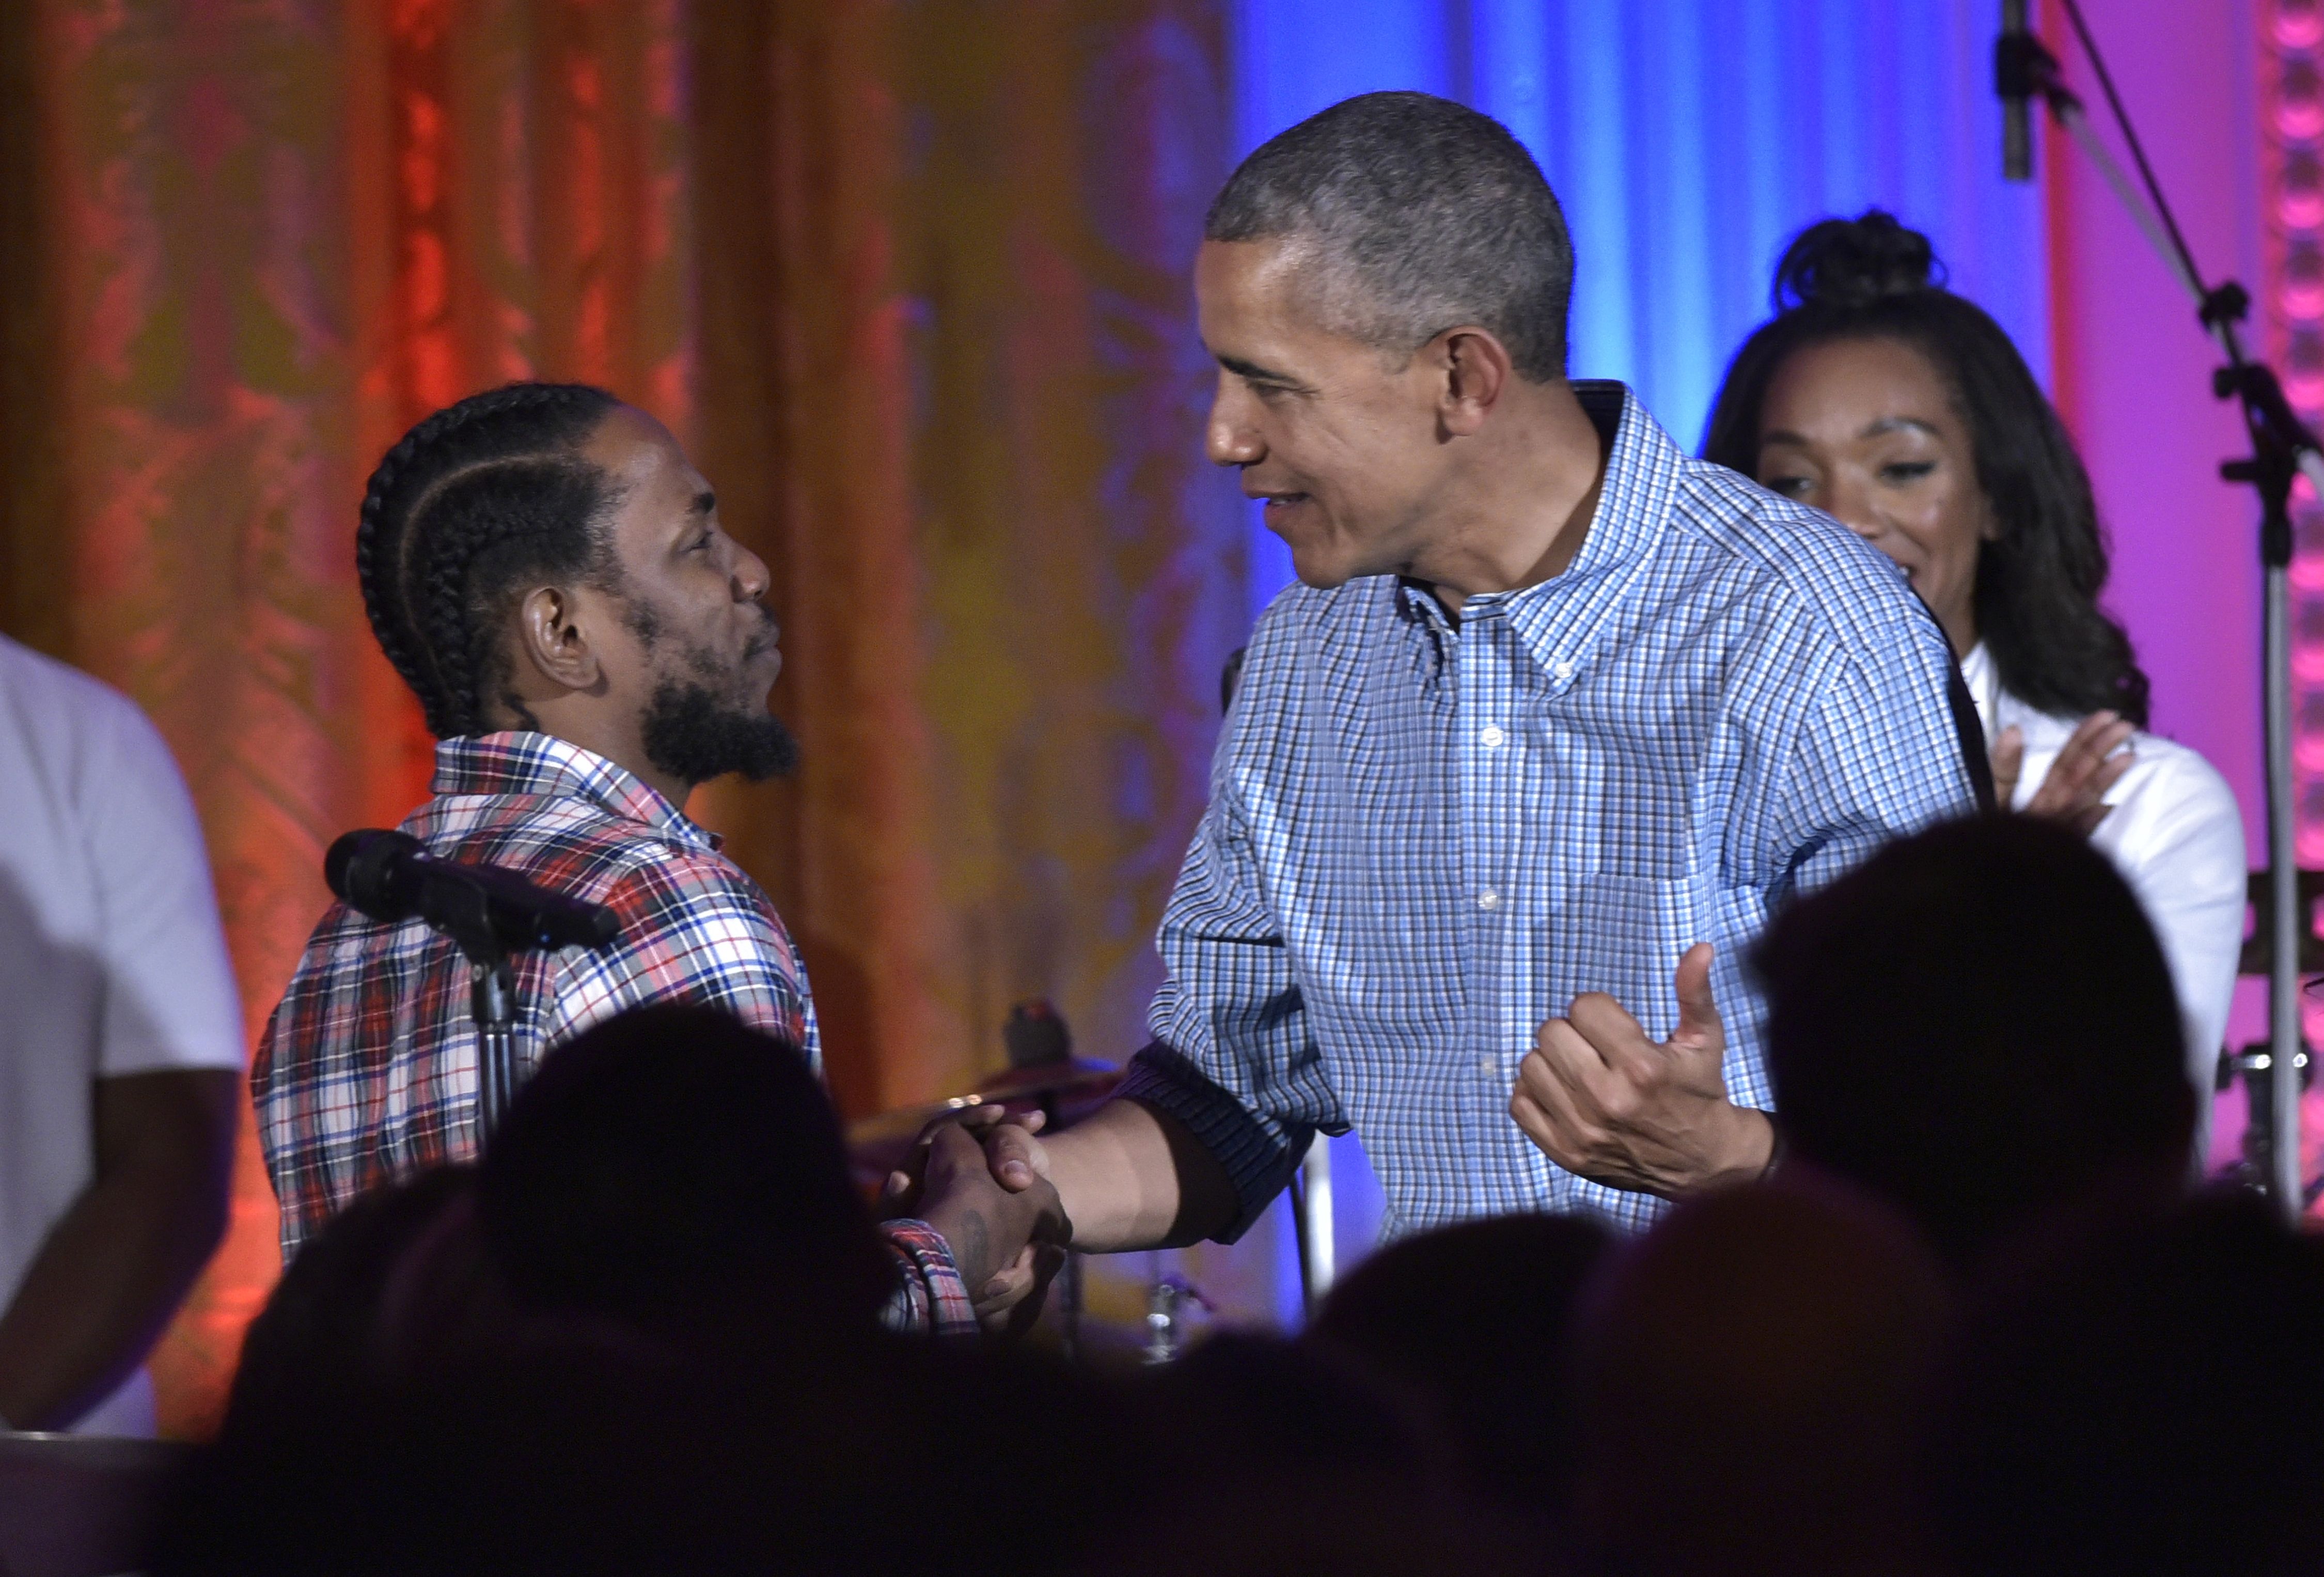 US President Barack Obama shakes hands with peformer Kendrick Lamar during an Independence Day Celebration for military members and administration staff on July 4, 2016 in the East Room of the White House in Washington, DC. (Mandel Ngan&mdash;Getty Images)